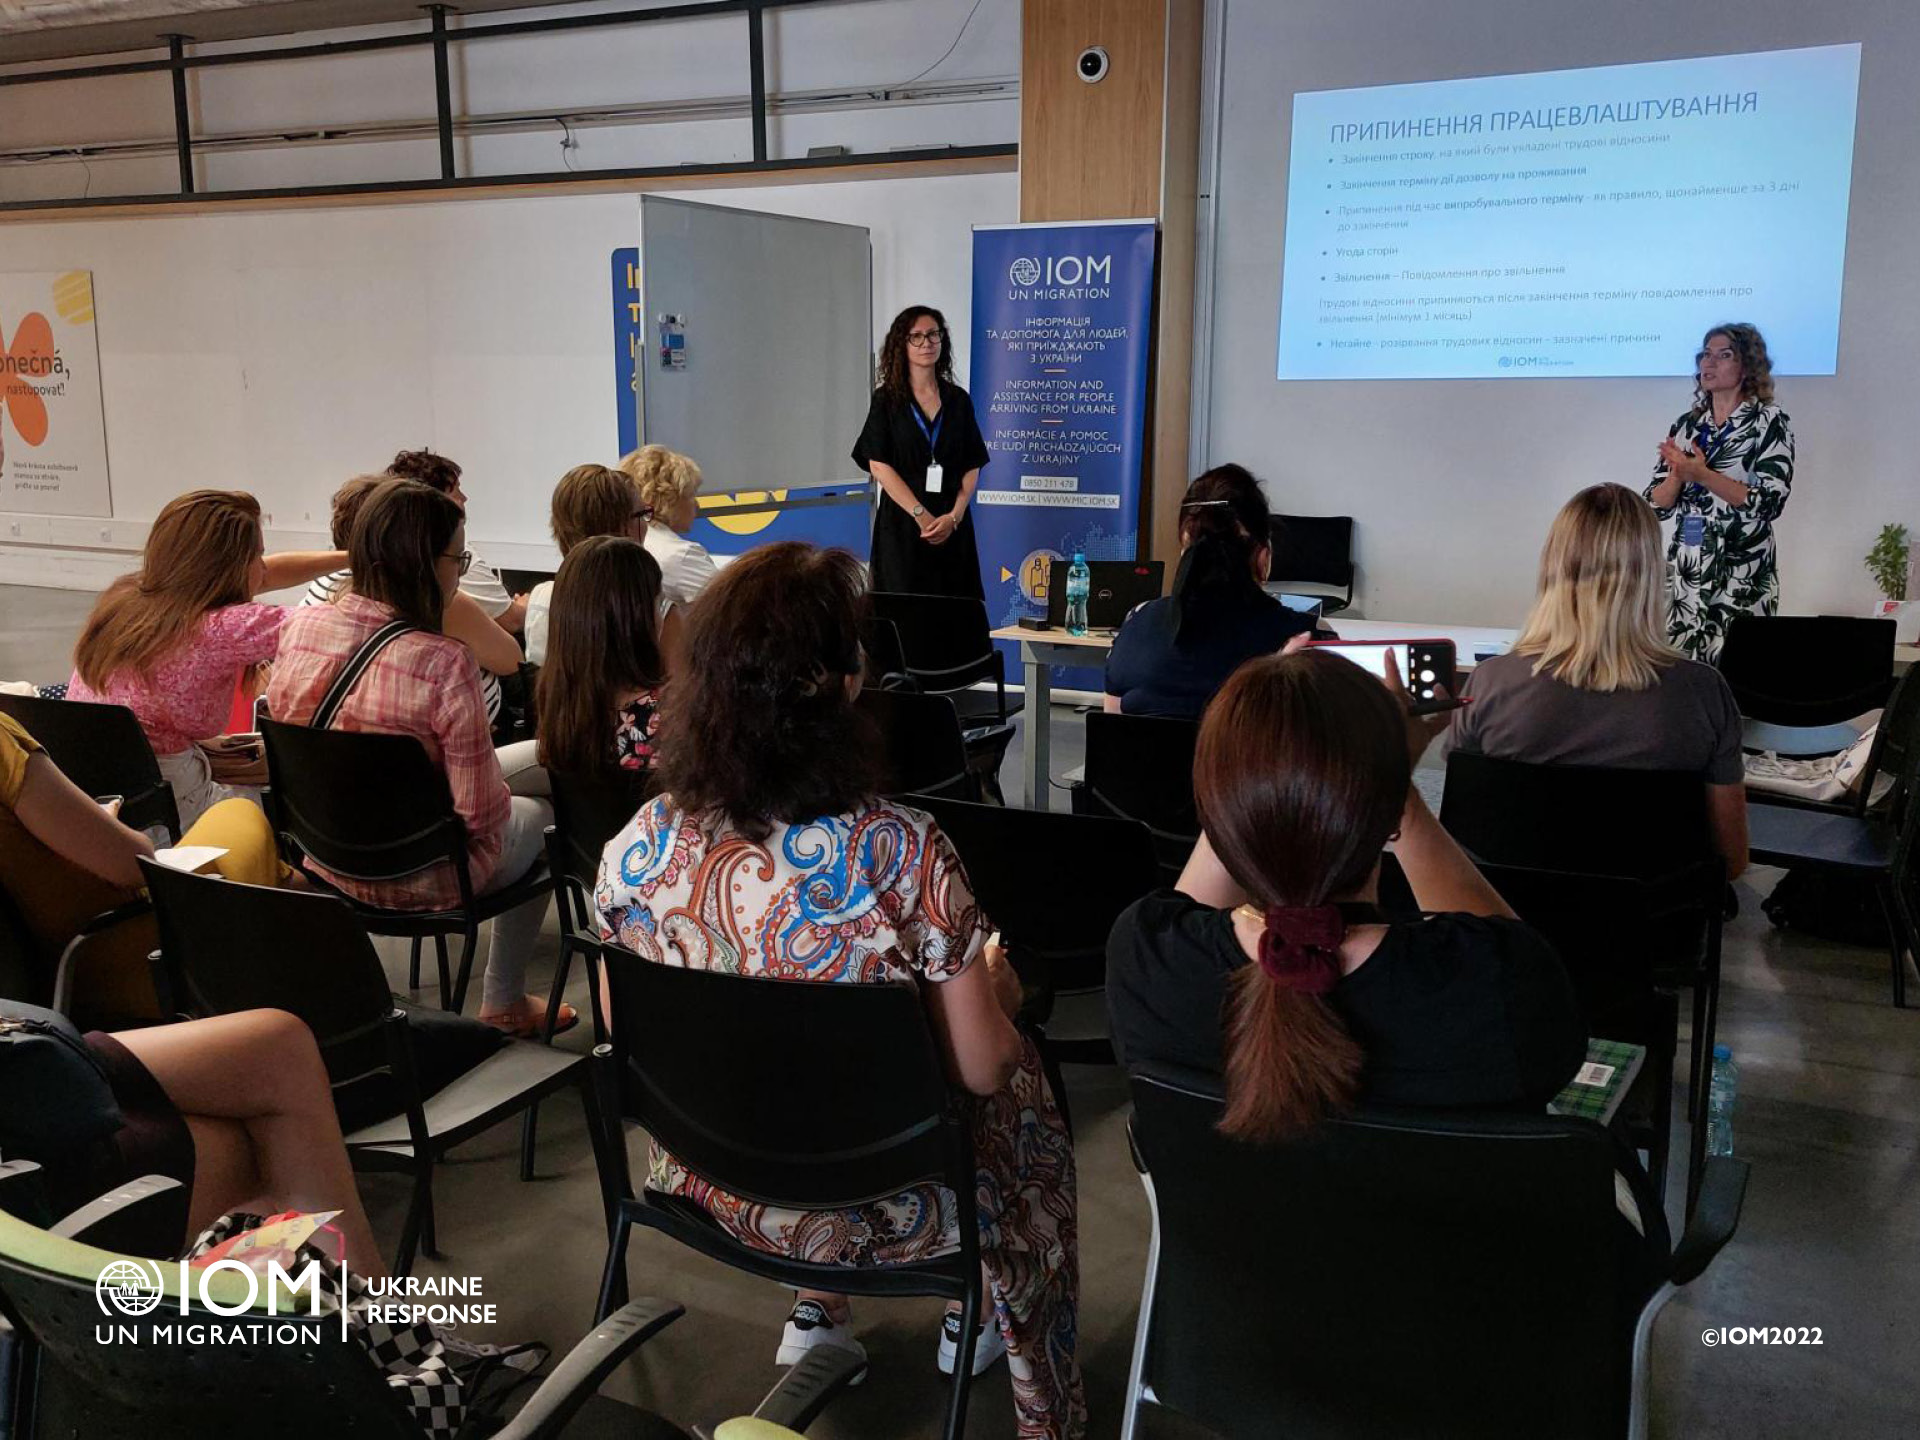 A session of the IOM MIC workshop at the Bottova Assistance Centre in Bratislava. Photo © International Organization for Migration (IOM) 2022.